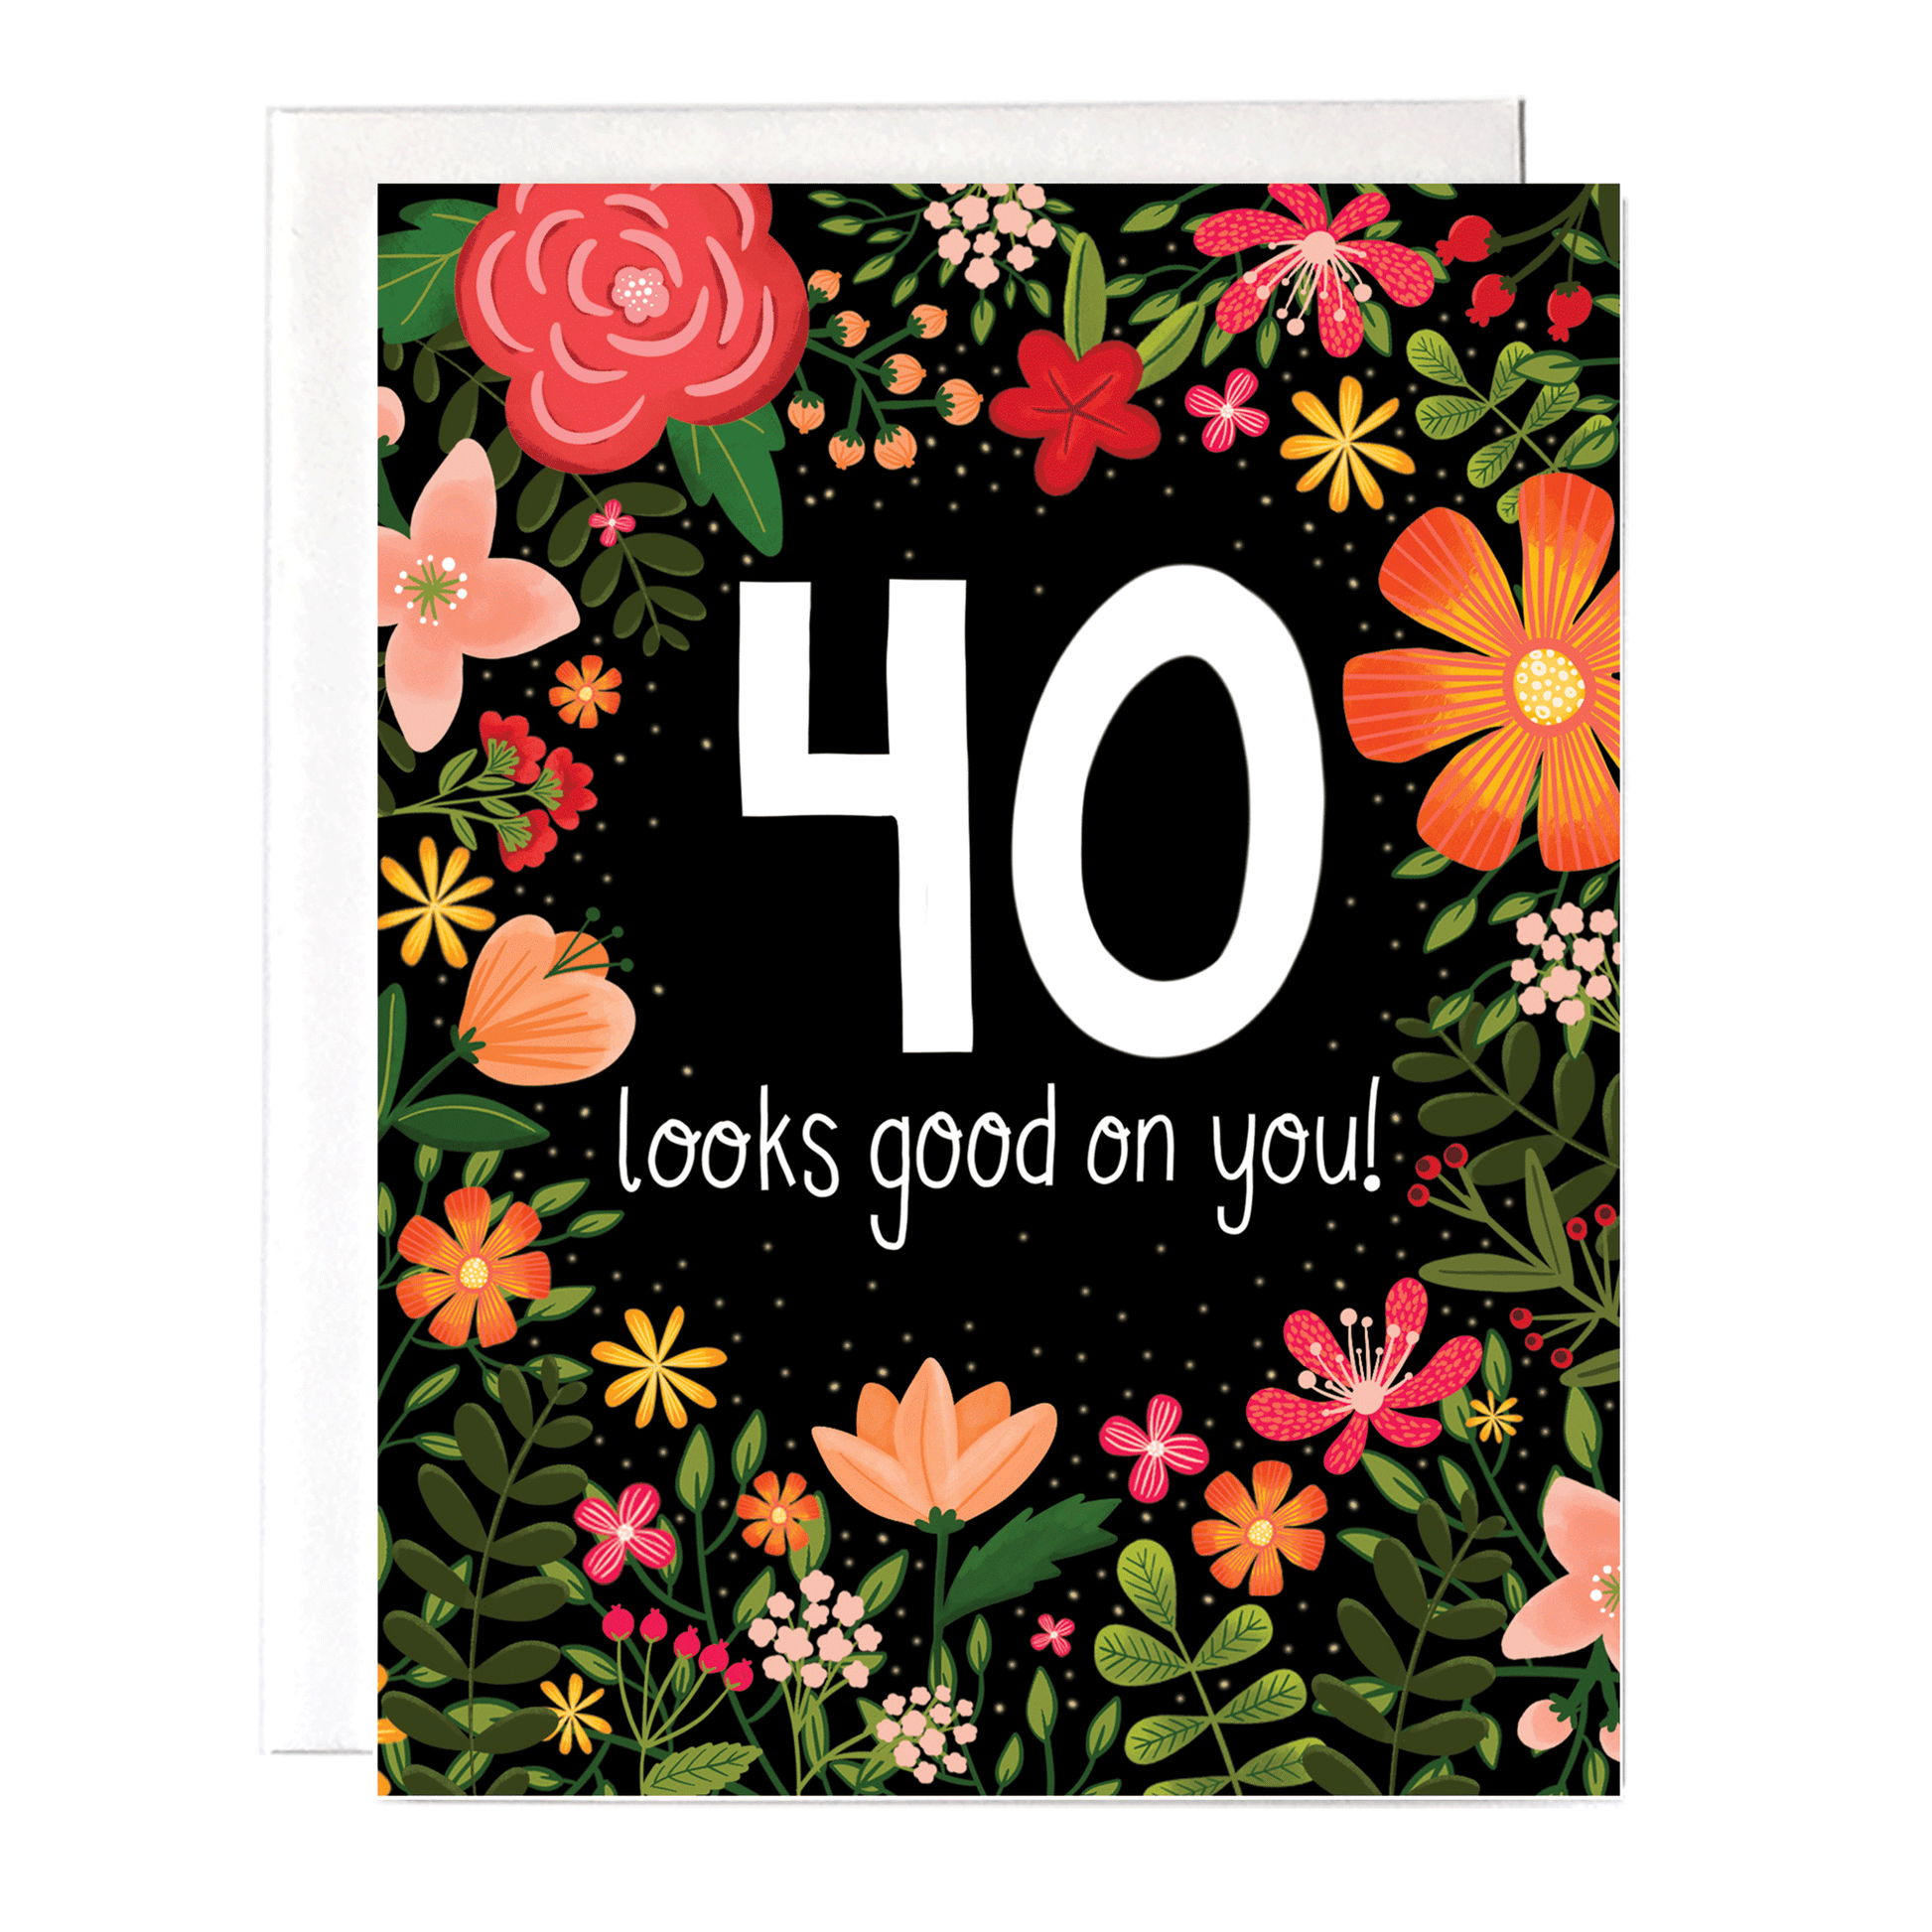 40th birthday card with flowers